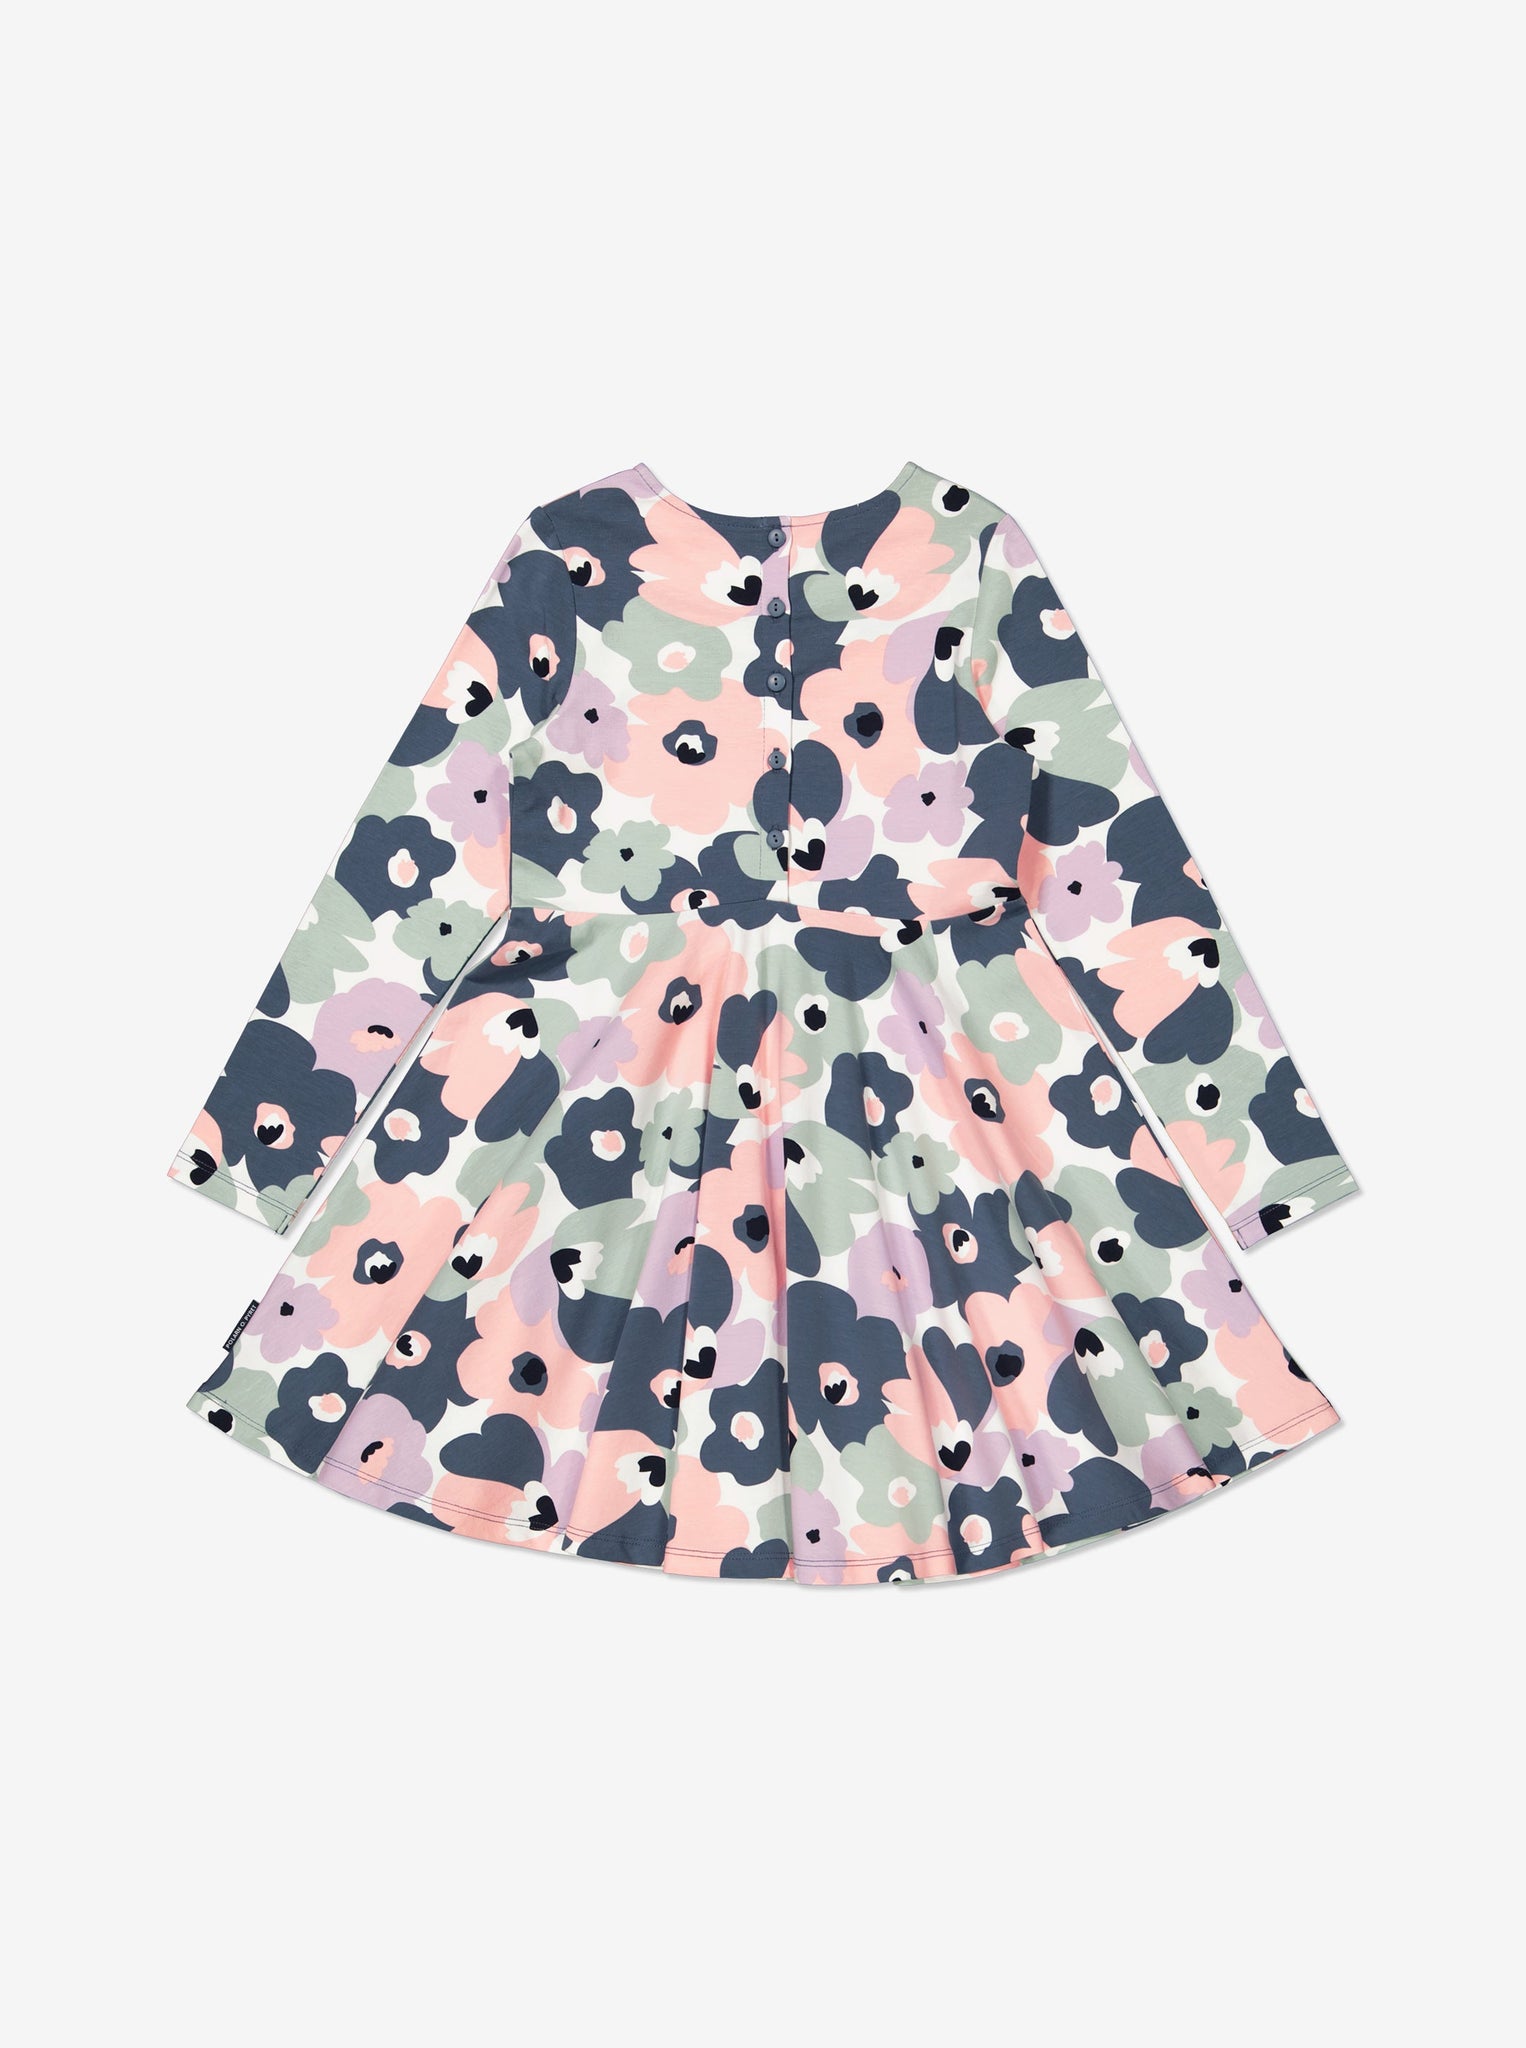  Organic Cotton Floral Kids Dress from Polarn O. Pyret Kidswear. Made using ethically sourced materials.